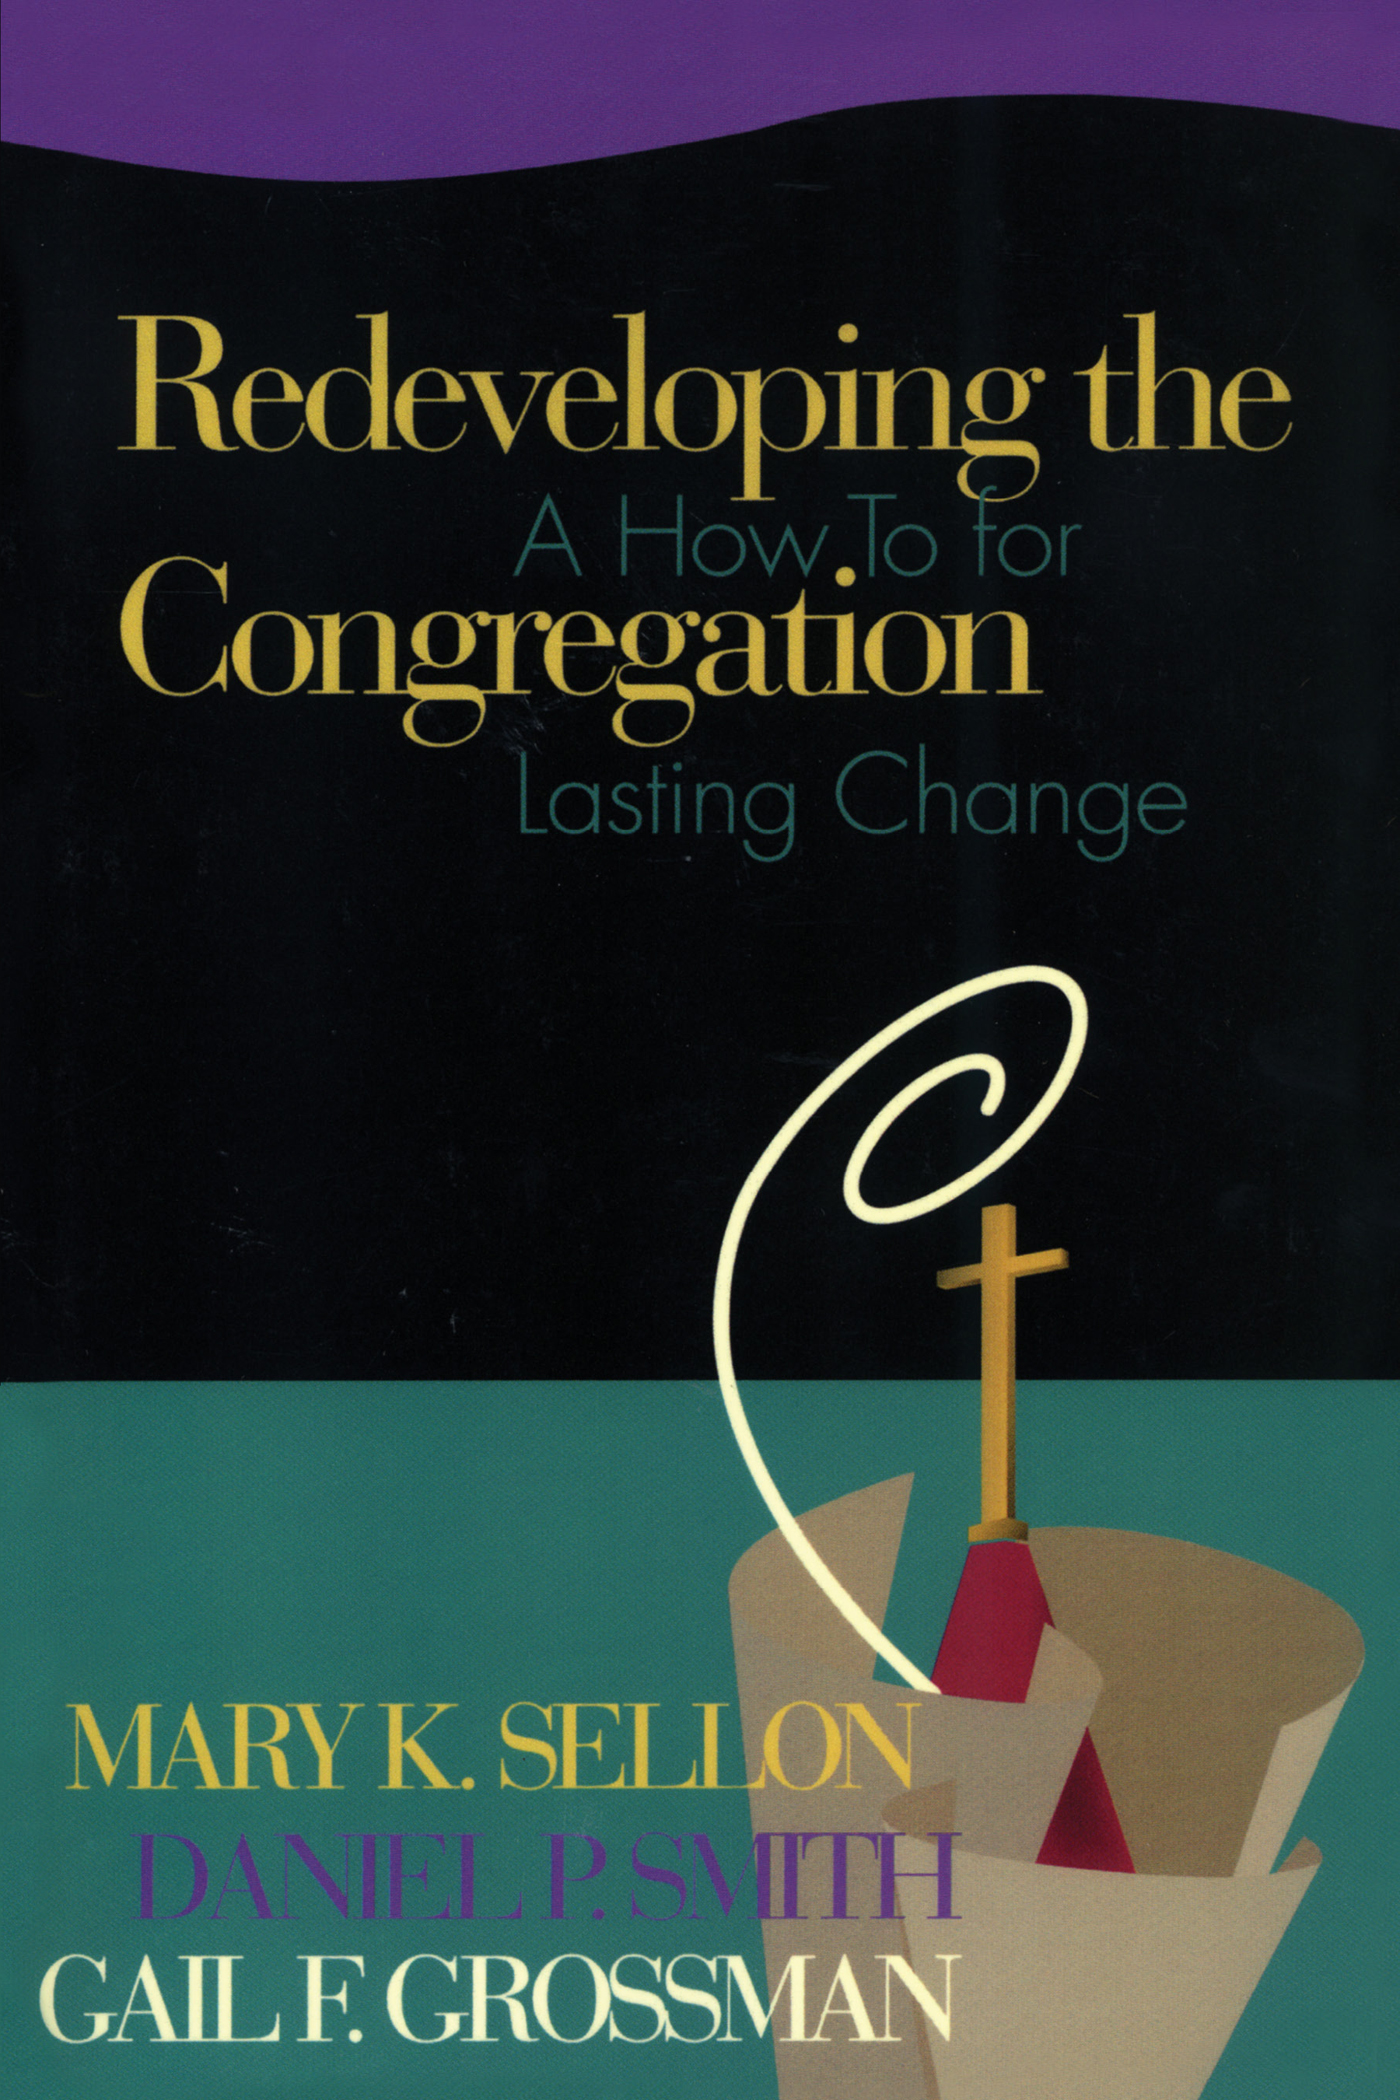 Redeveloping the Congregation: A How to for Lasting Change